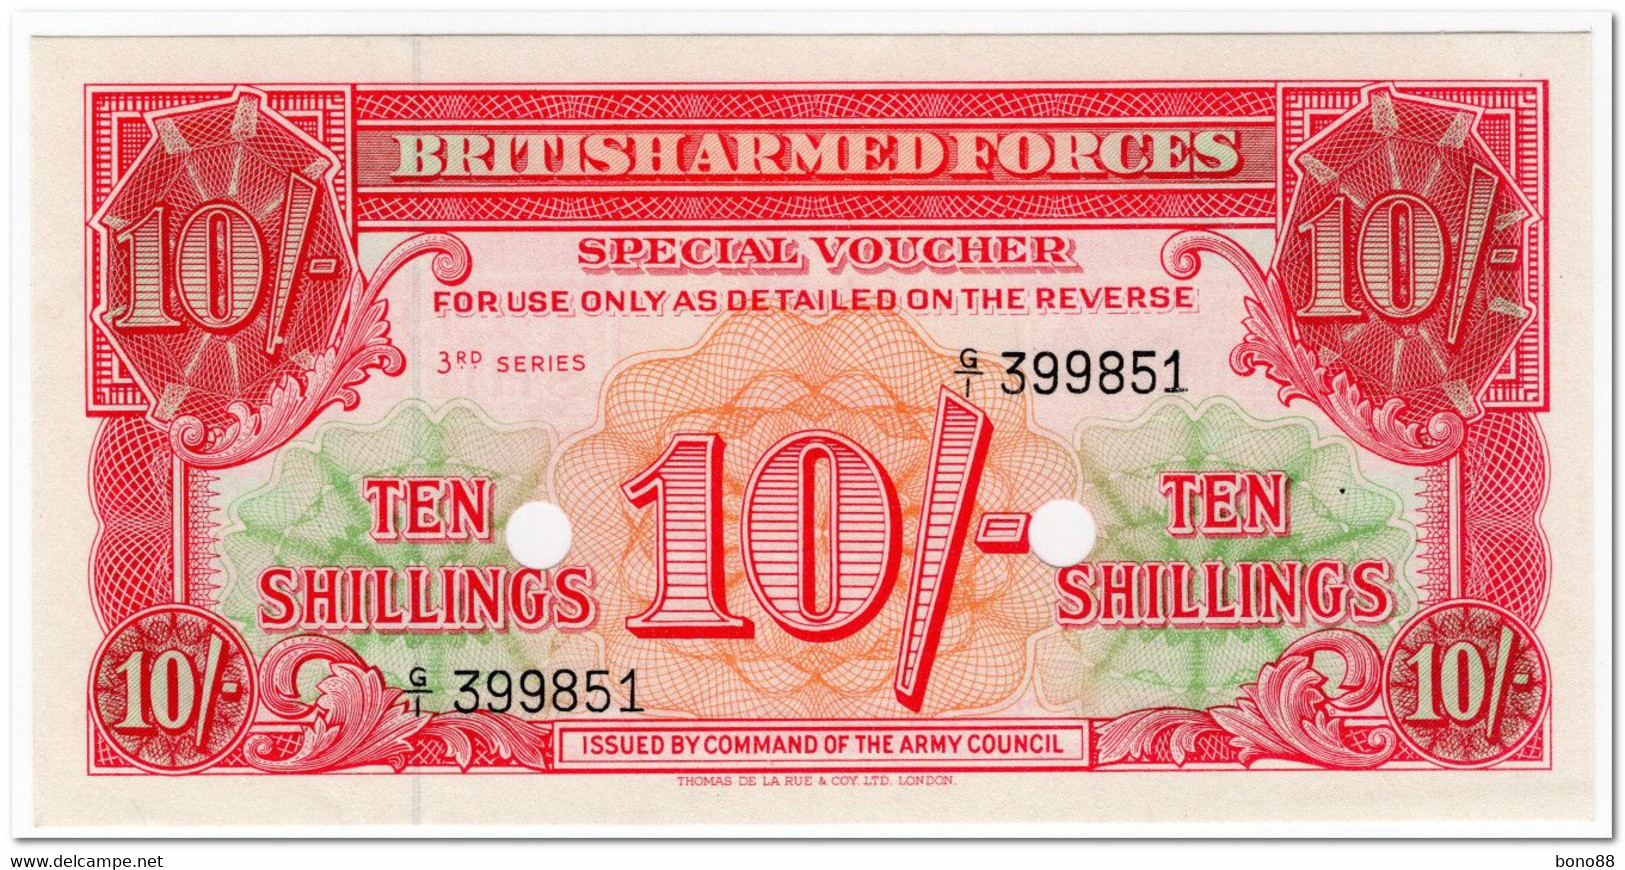 GREAT BRITAIN,BRITISH ARMED FORCES,10 SHILLINGS,1956,CANCELLEDP.M28a,UNC - British Armed Forces & Special Vouchers